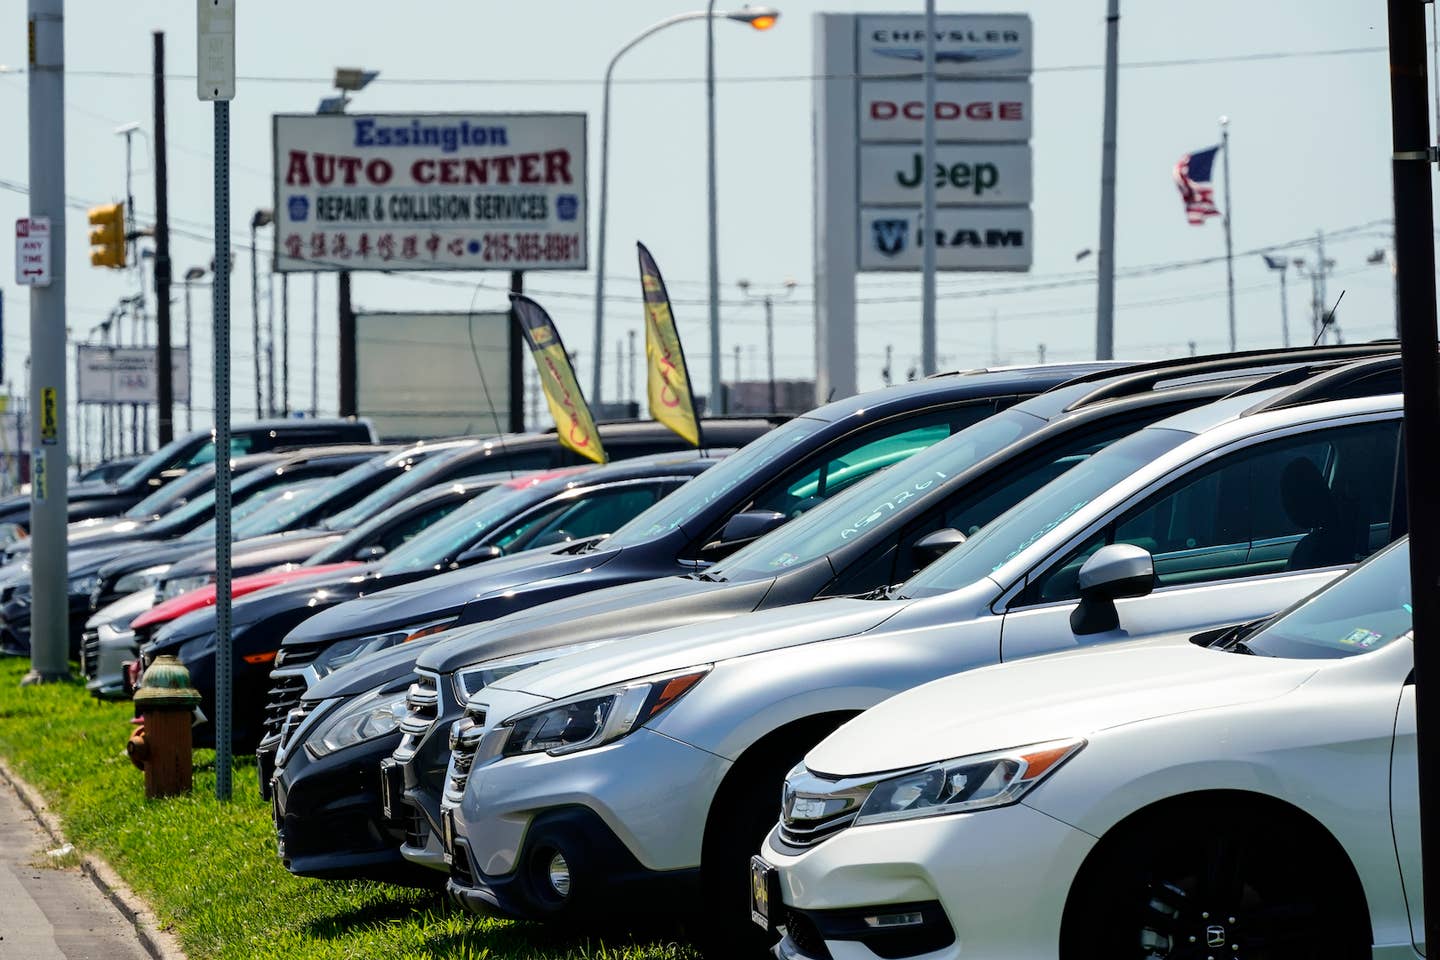 Used cars for sale are parked roadside at an auto lot in Philadelphia | <em>AP Photo, Matt Rourke</em>